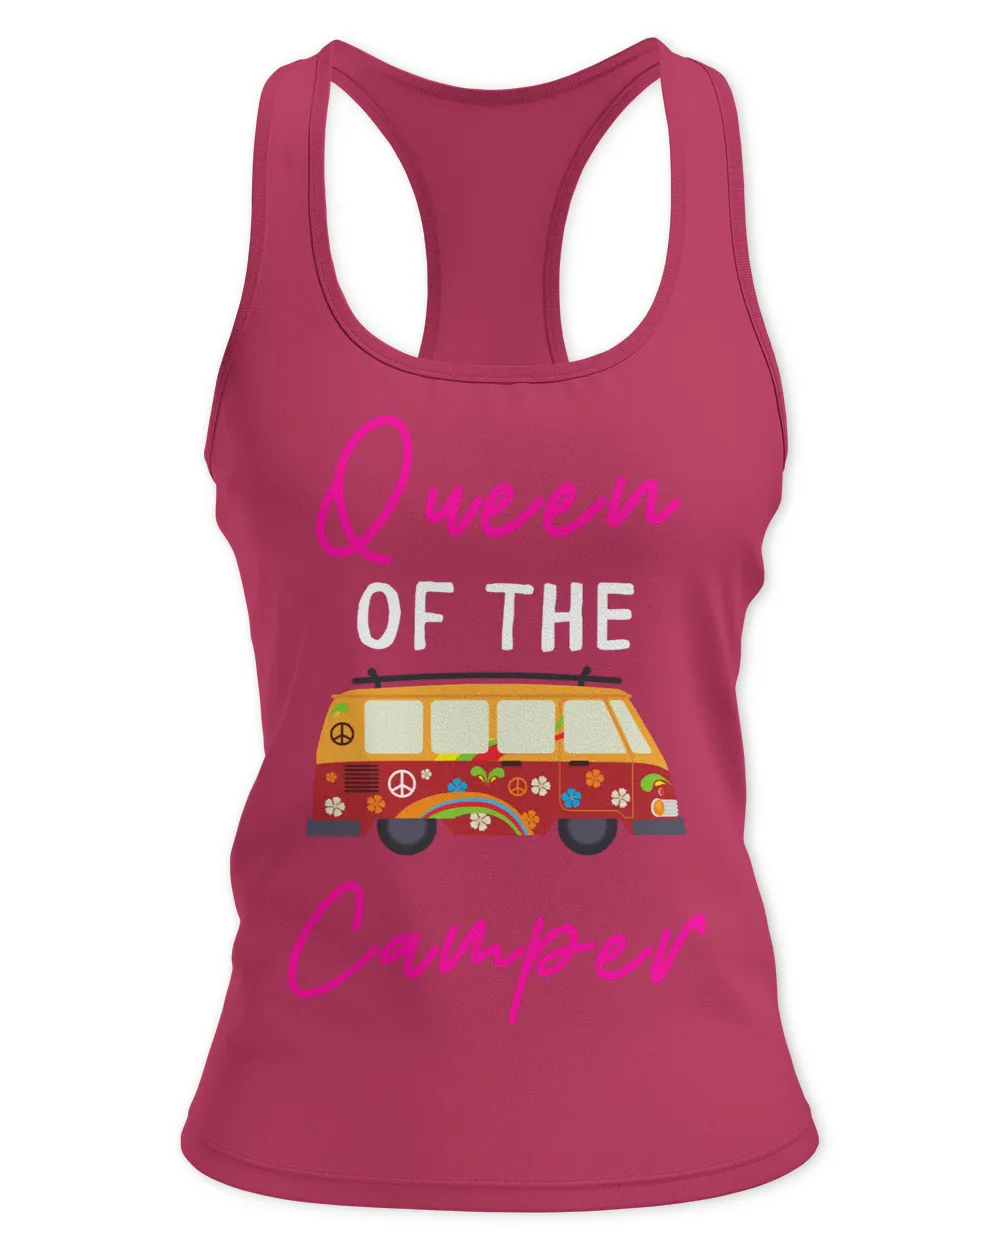 Camping Camp Queen Of The Camper